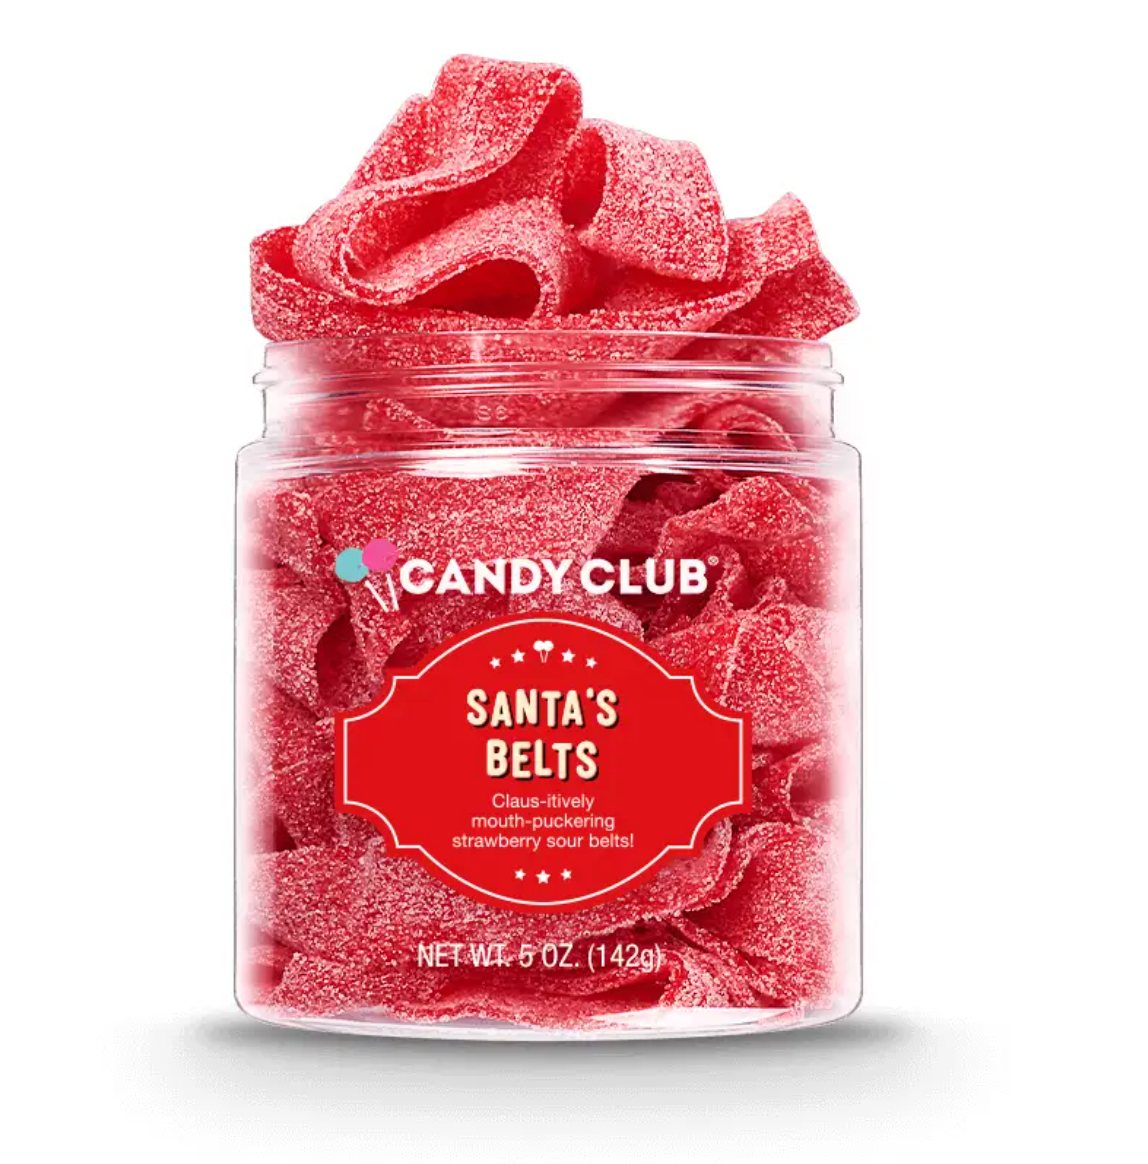 Candy Club Santa's Belts - CHRISTMAS COLLECTION